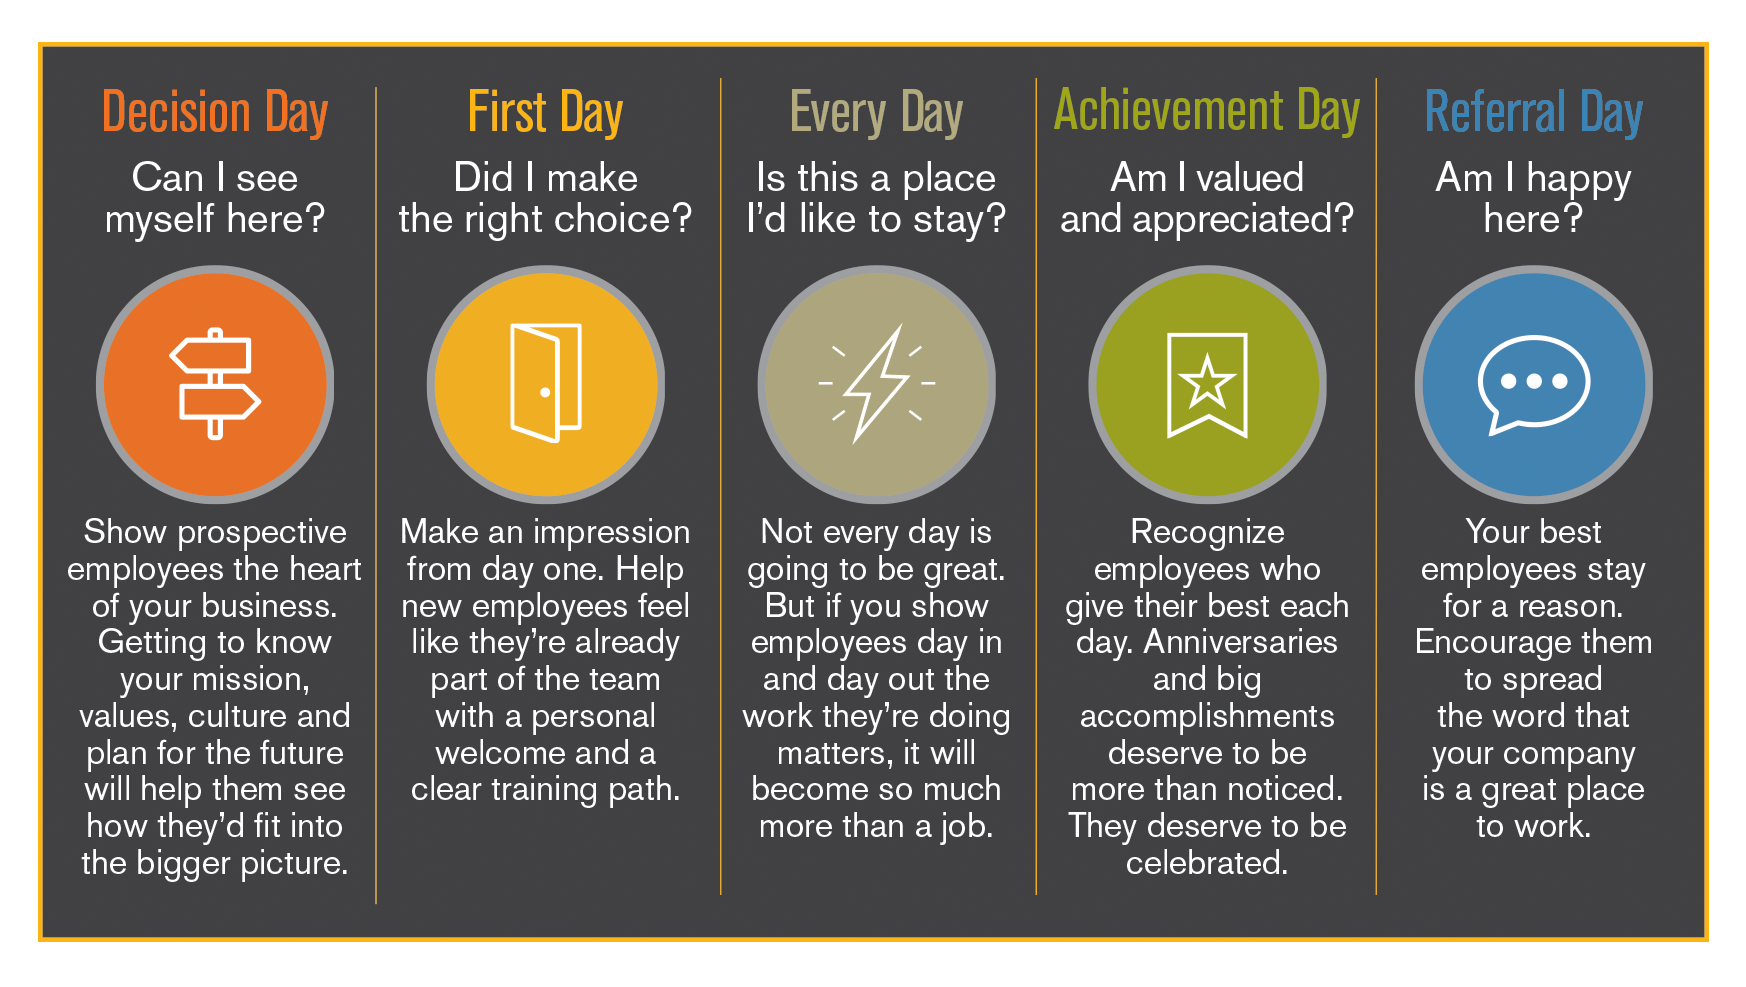 Decision Day 10 steps to attracting, recruiting and retaining employees